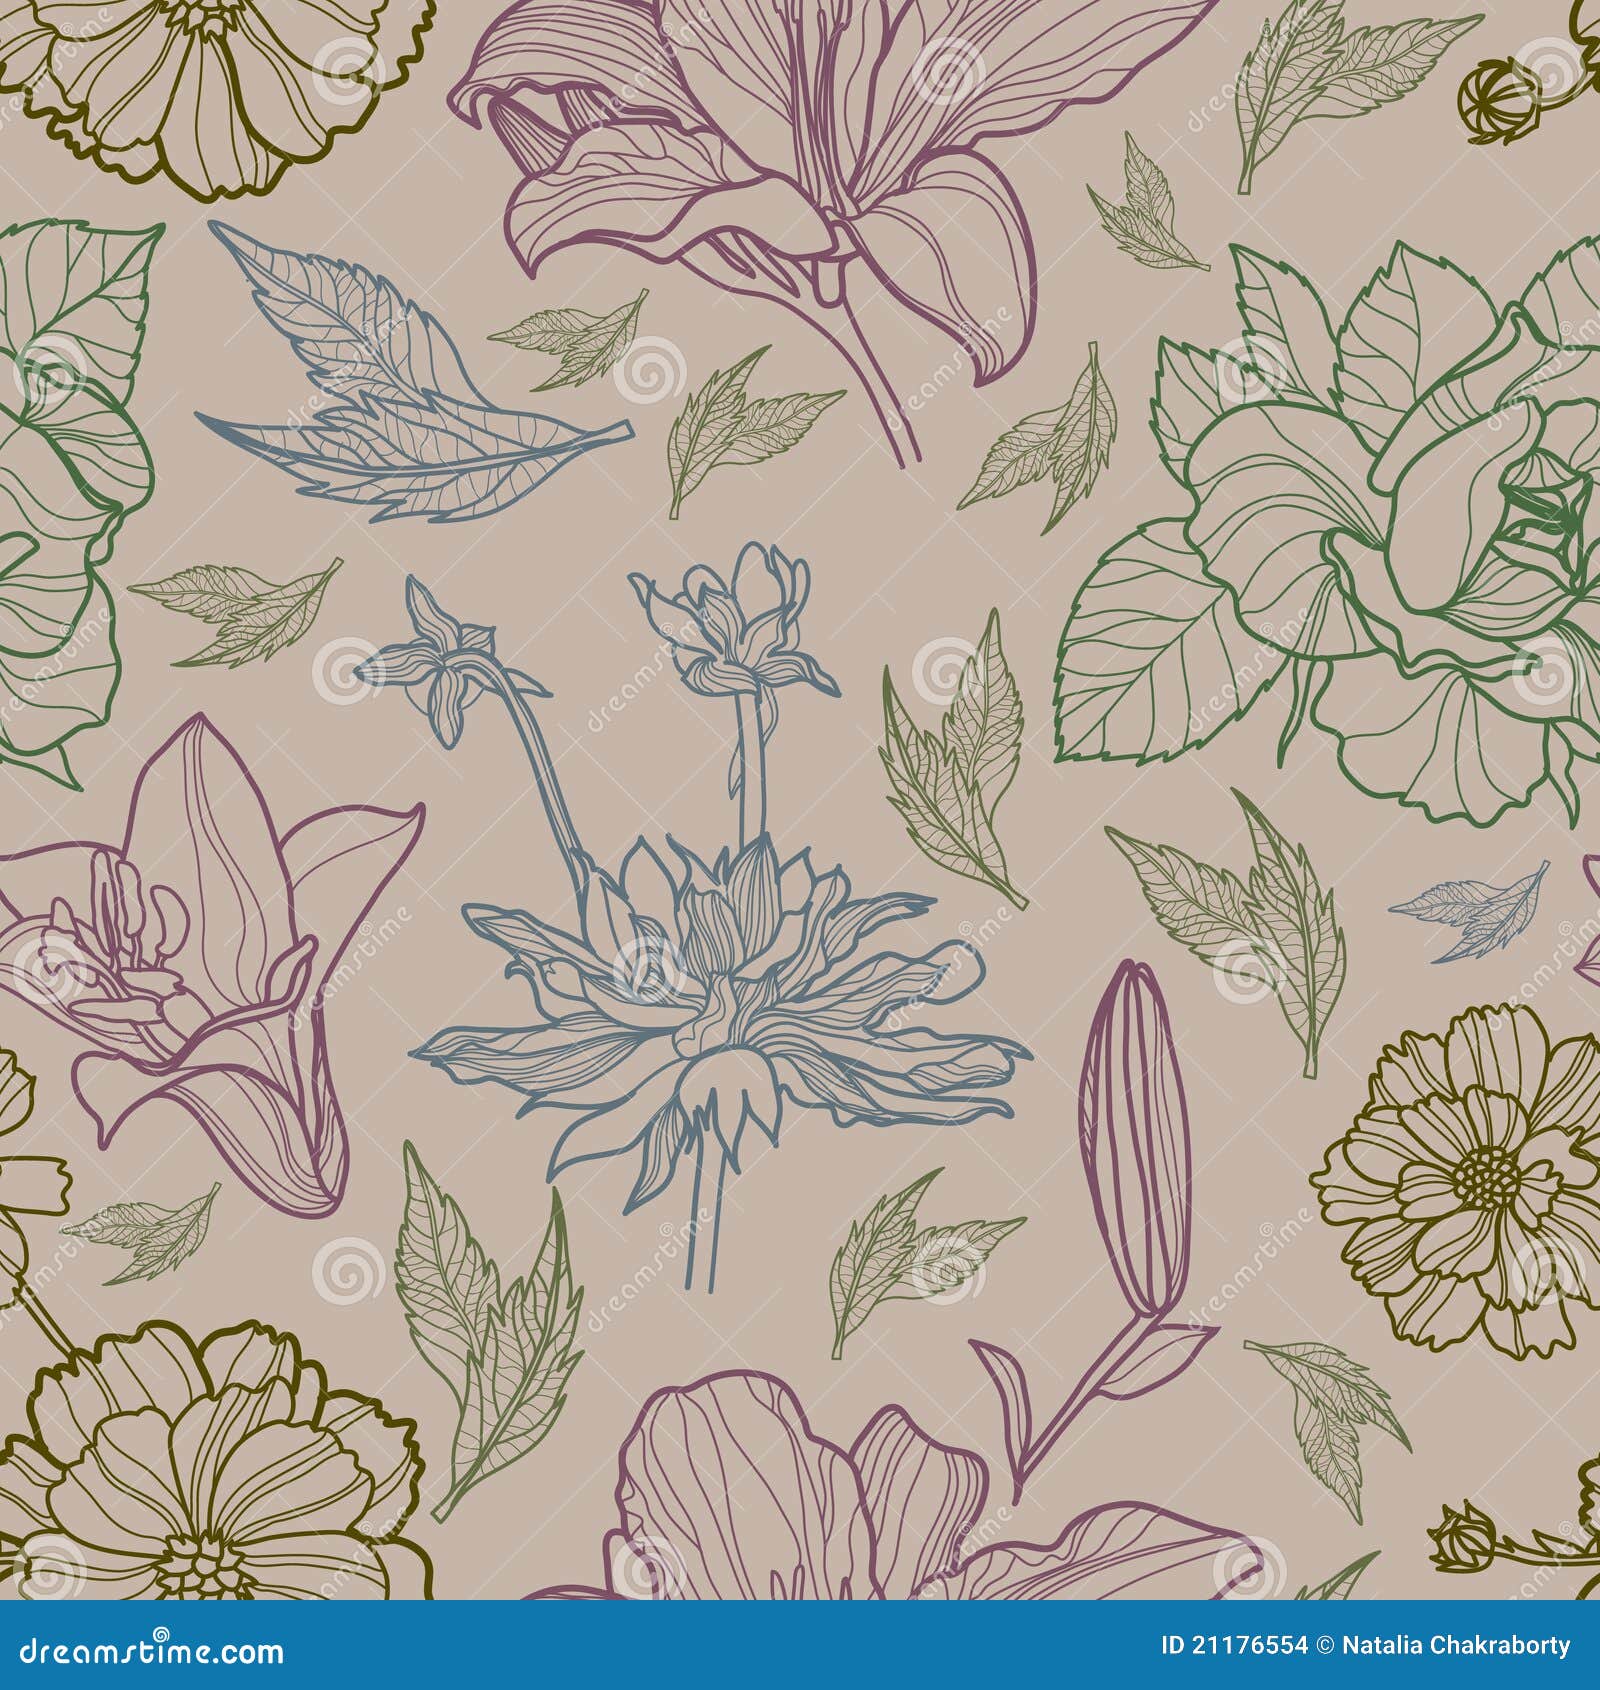  seamless floral pattern with herbarium